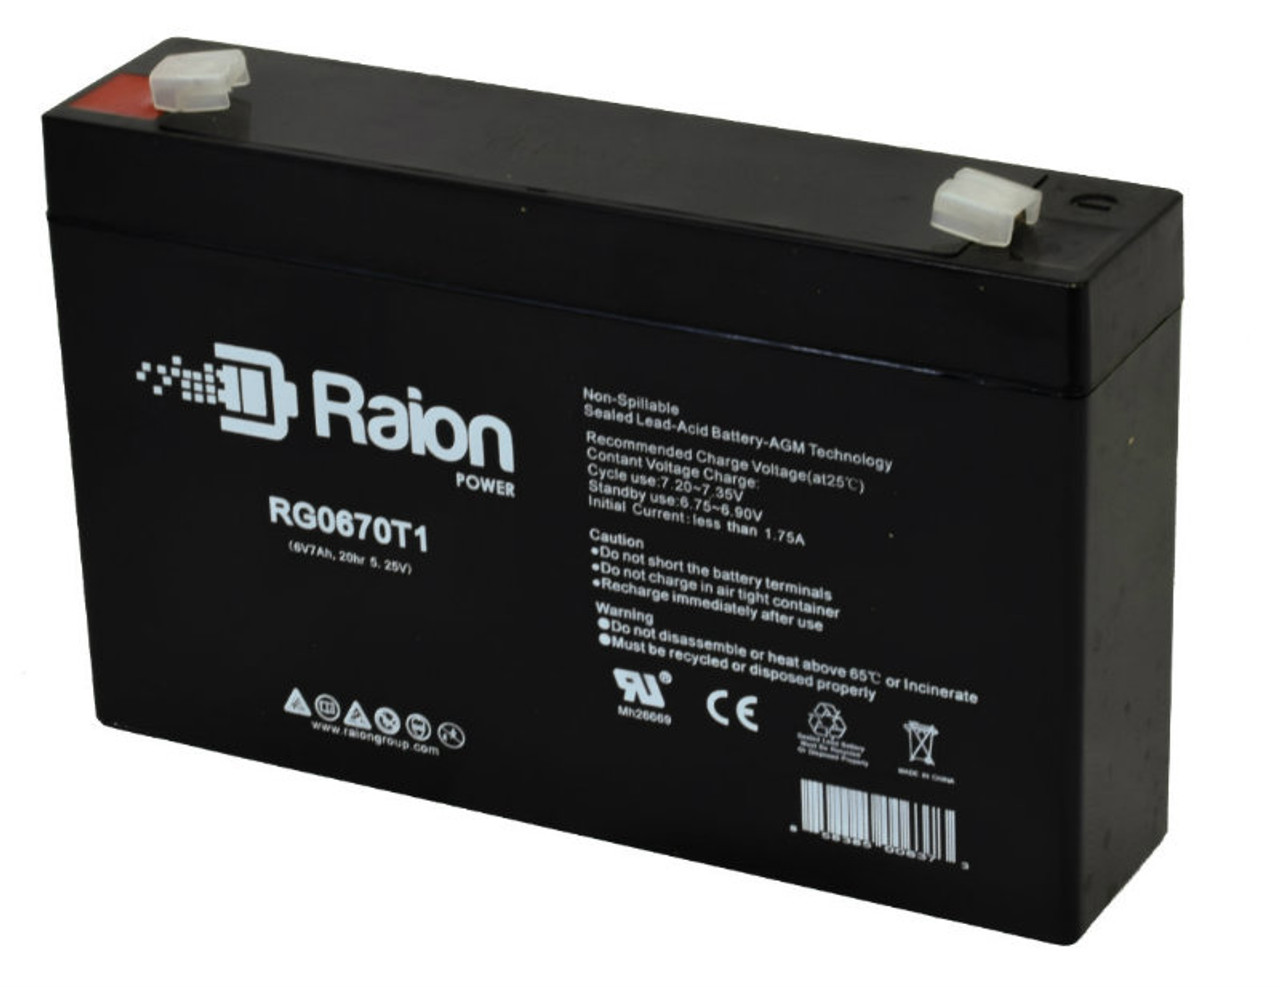 Raion Power RG0670T1 Replacement Battery for GFX NP7-6 OEM Battery